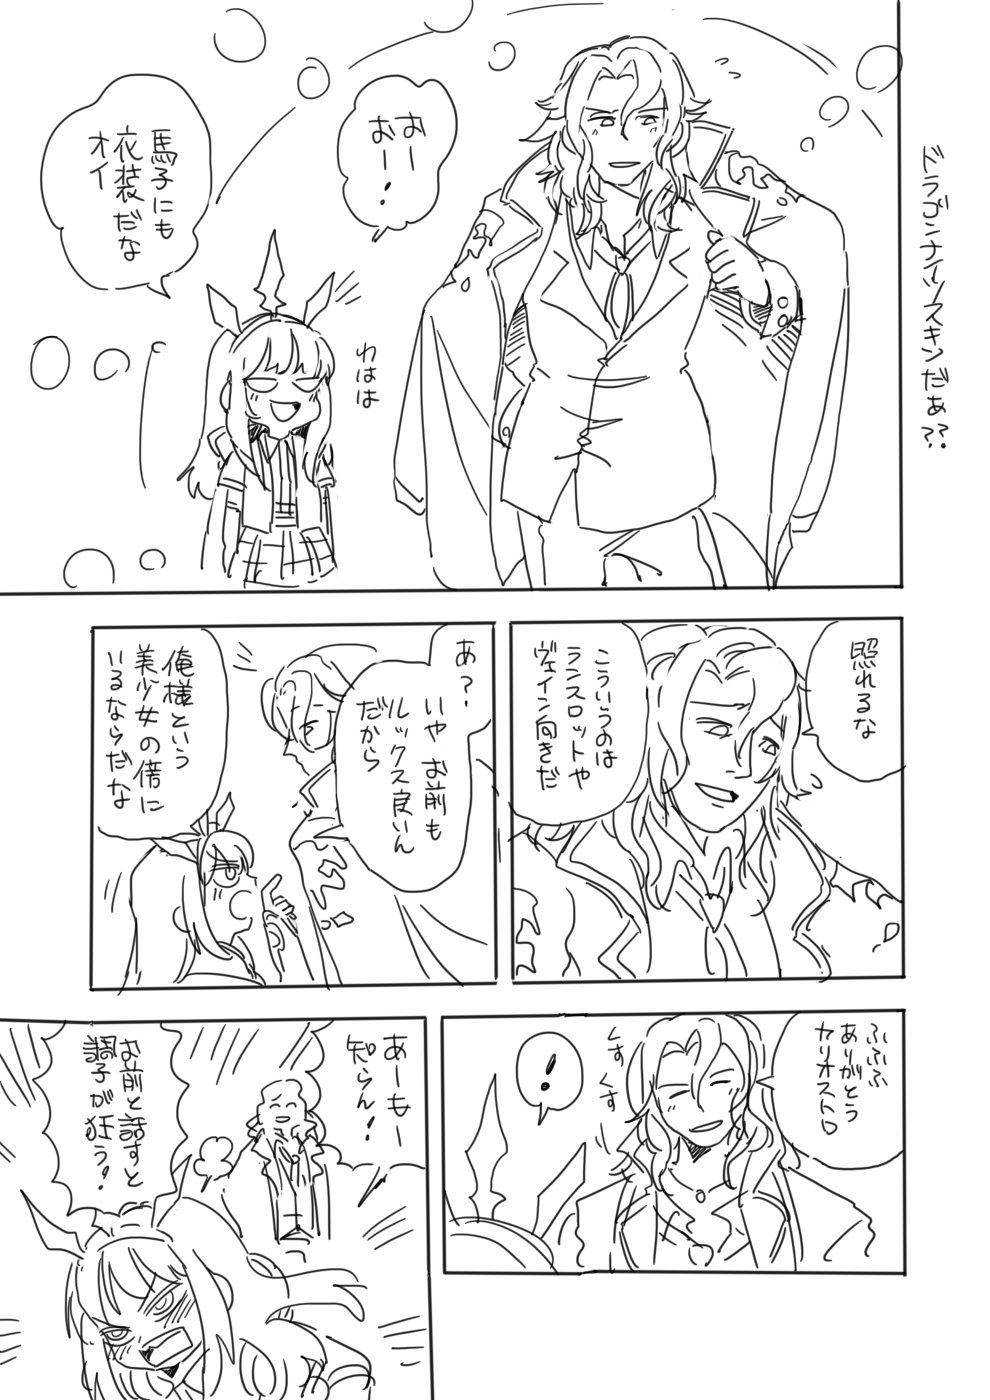 1boy 1girl cagliostro_(granblue_fantasy) comic granblue_fantasy height_difference highres jacket_on_shoulders ryou-san siegfried_(granblue_fantasy) skirt the_dragon_knights translation_request